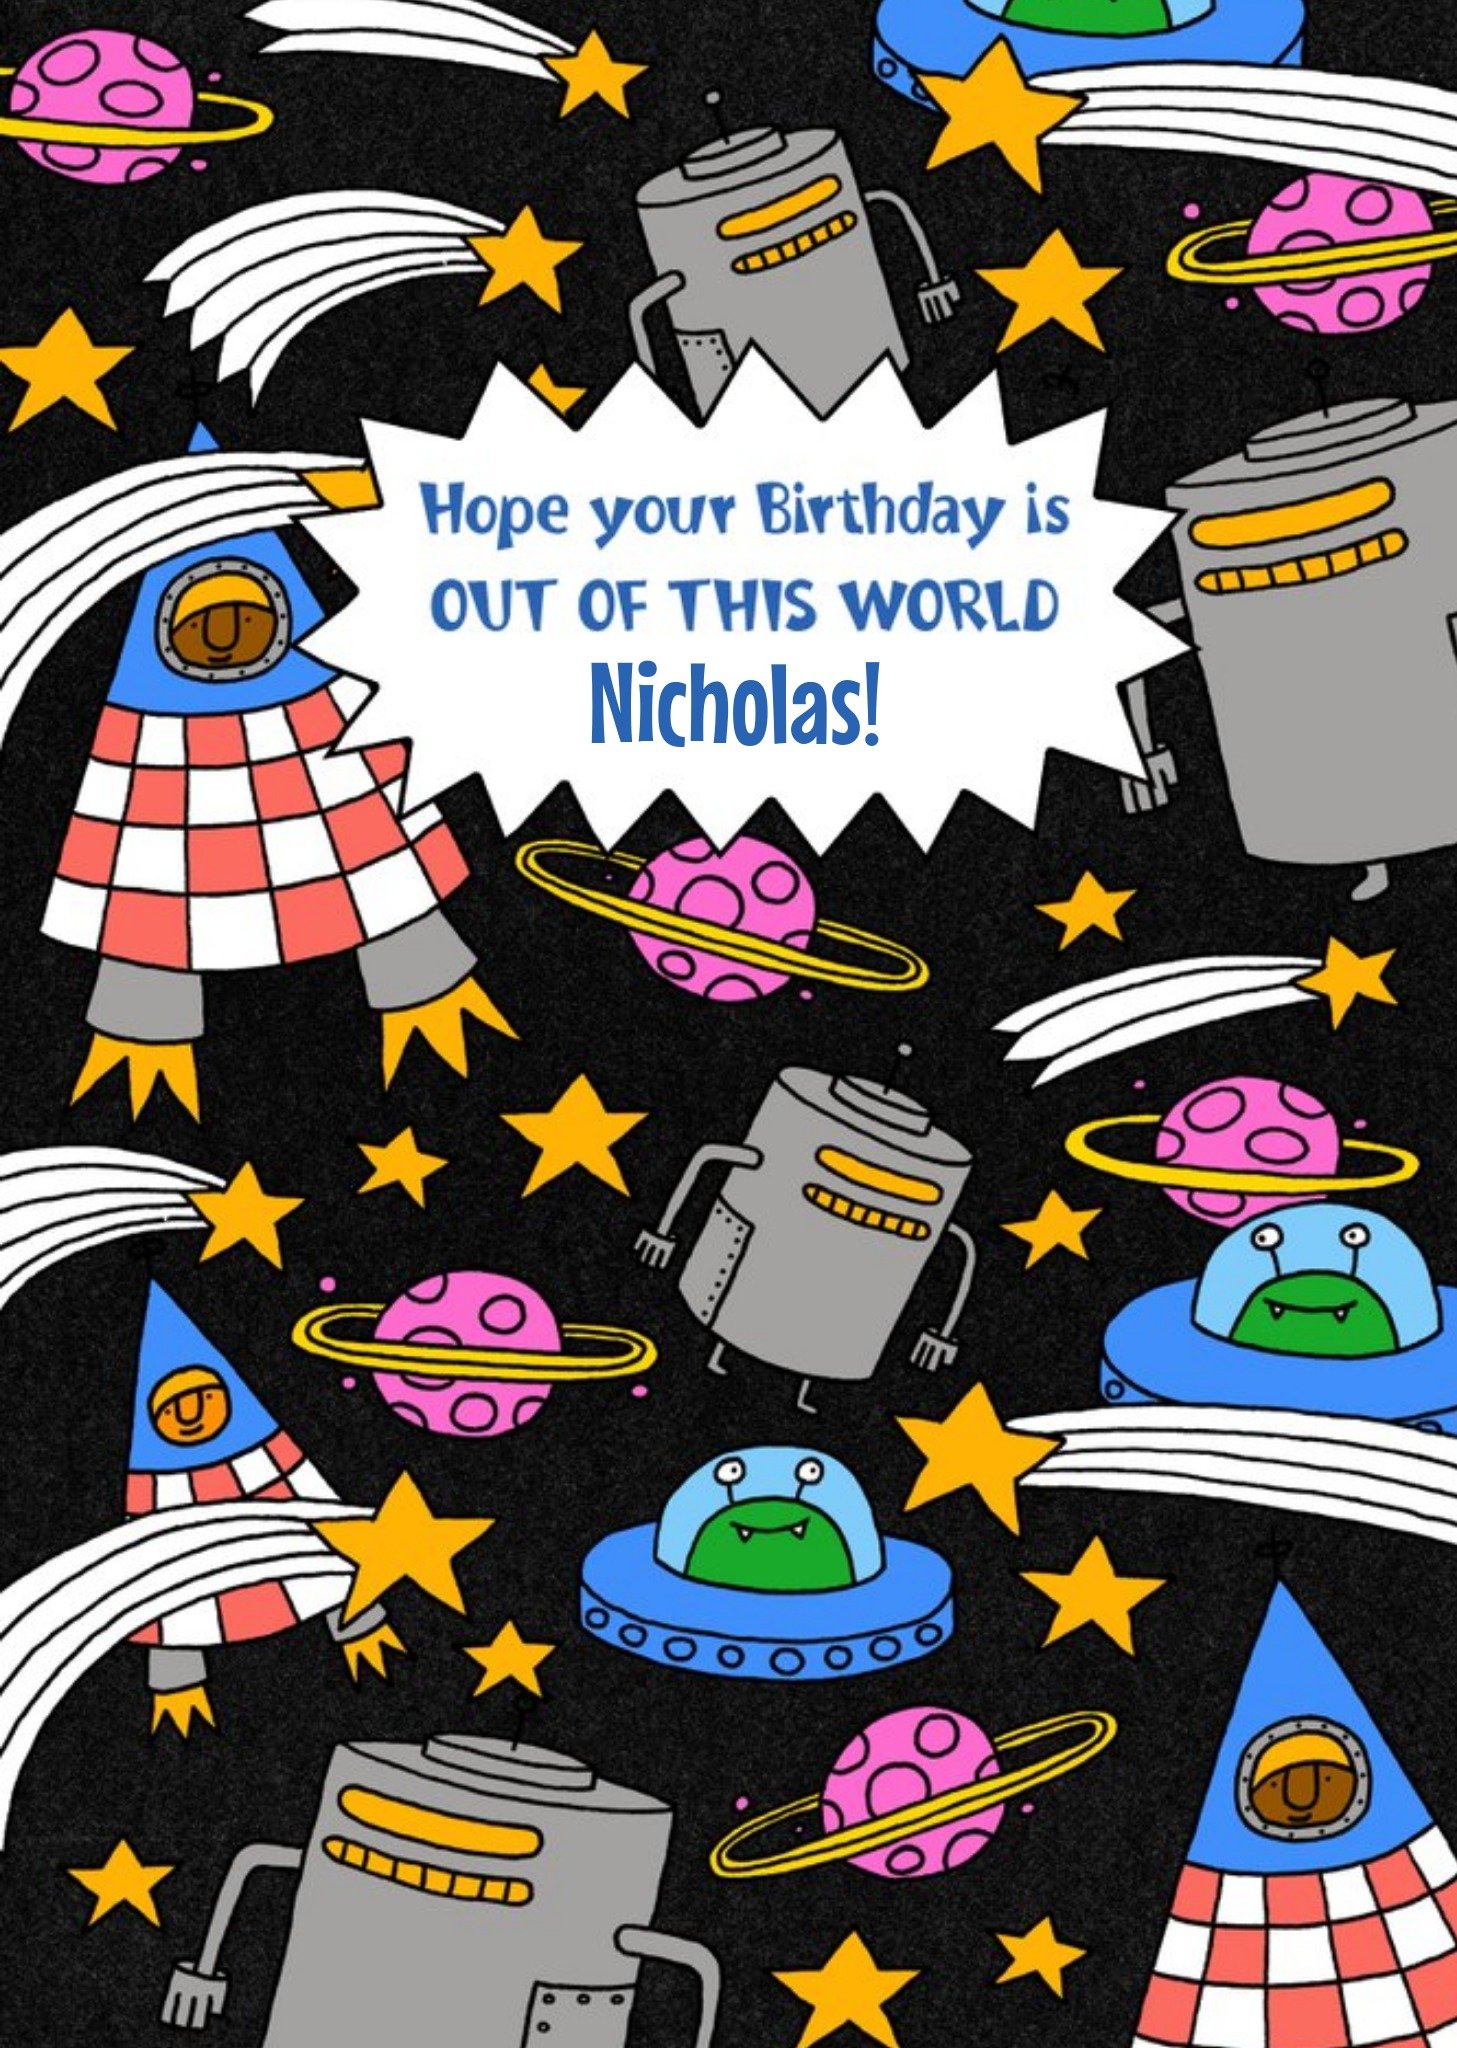 Moonpig Spaceships Space Astronauts Aliens Out Of This World Birthday Card Ecard